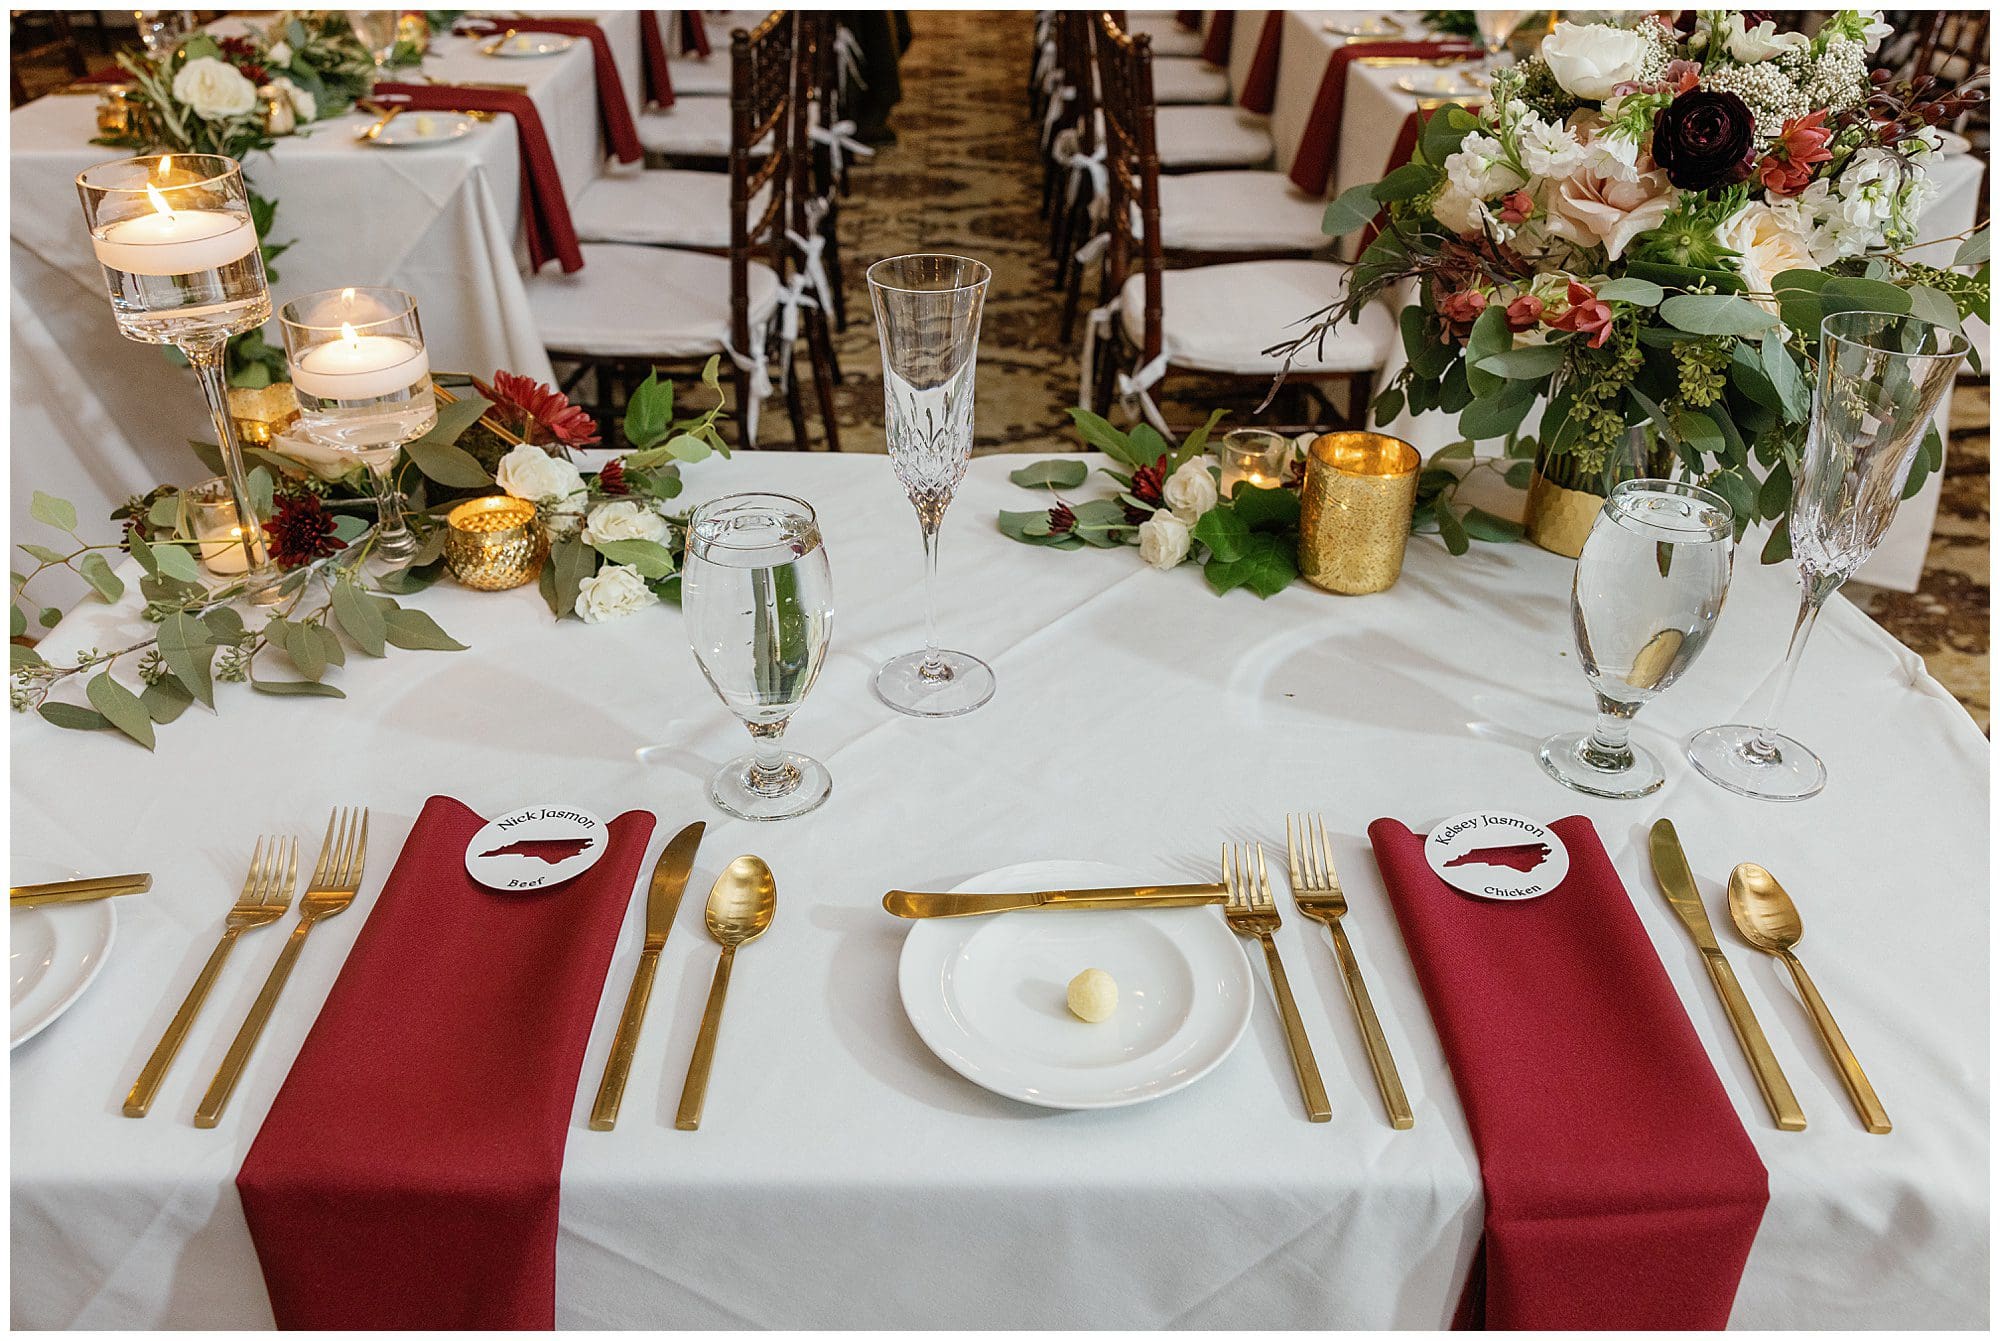 A wedding table setting with gold and burgundy napkins and forks.